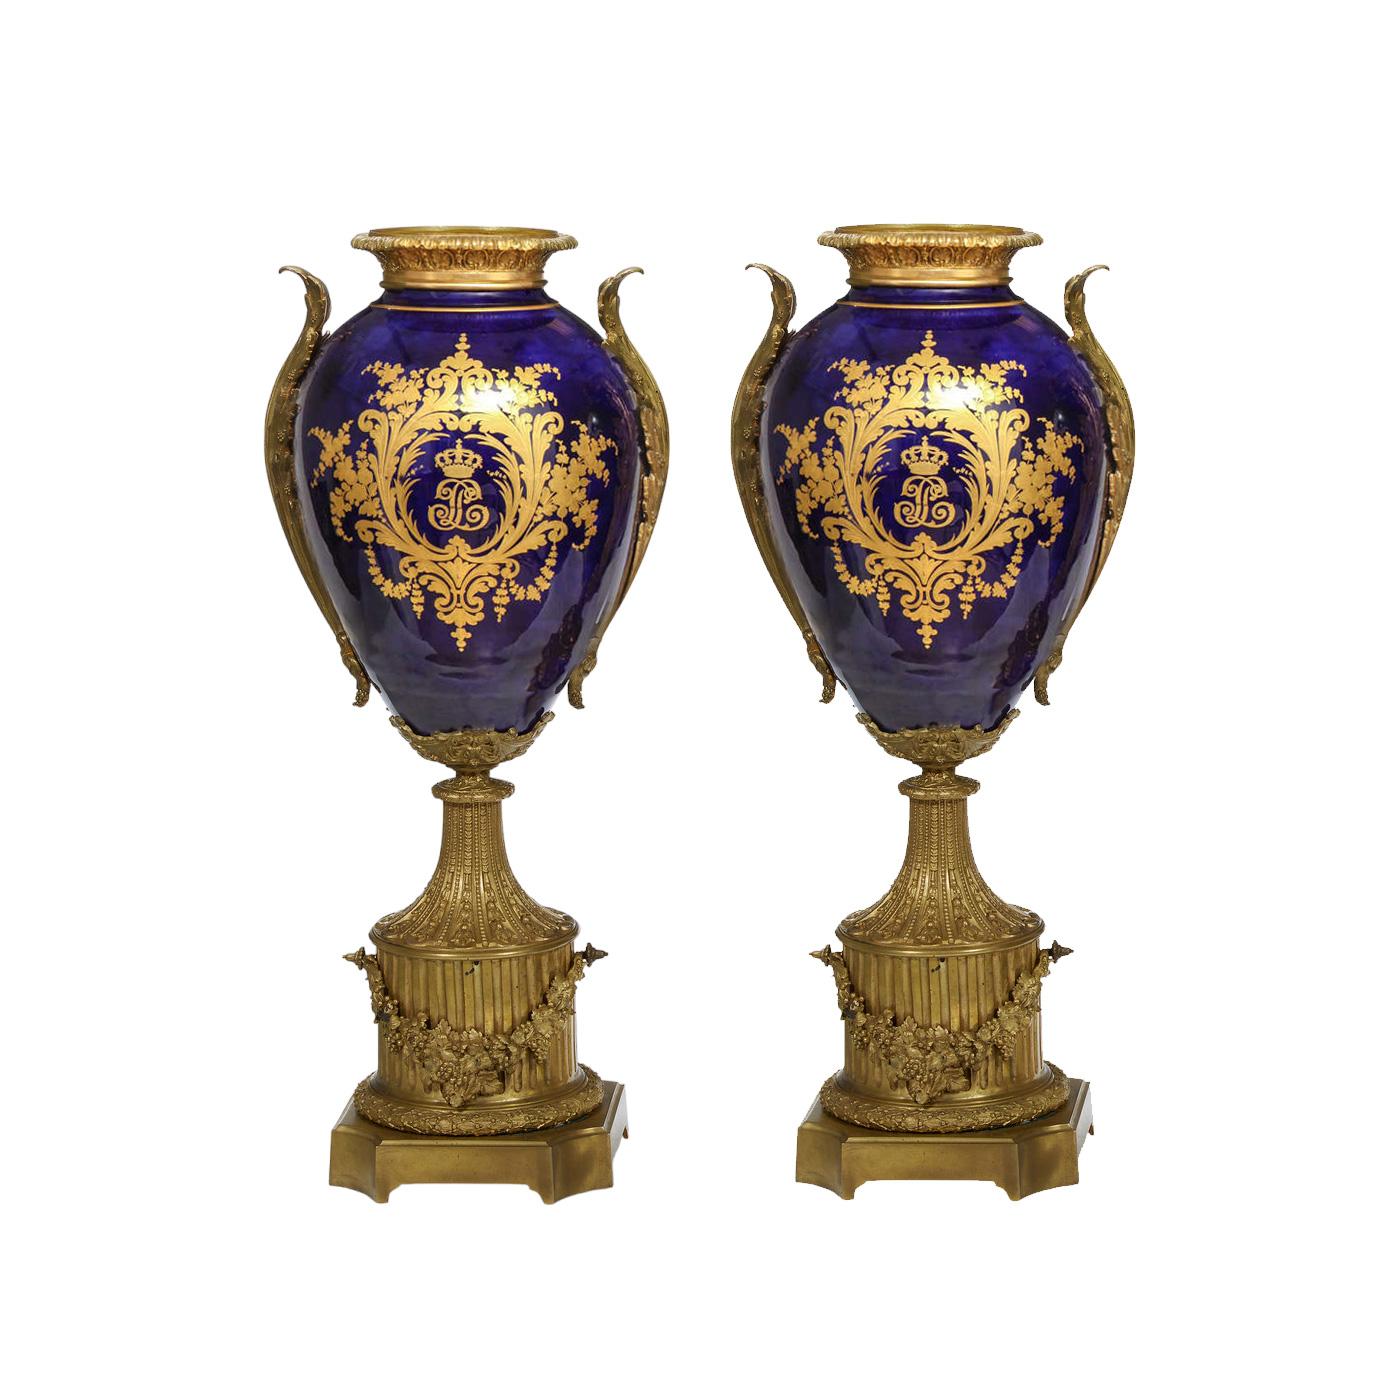 This impressive pair of monumental antique porcelain vases is a testament to the opulence of French craftsmanship in the style reminiscent of Sèvres porcelain, dating back to around 1850. The vases are of a traditional baluster shape. Each vase is